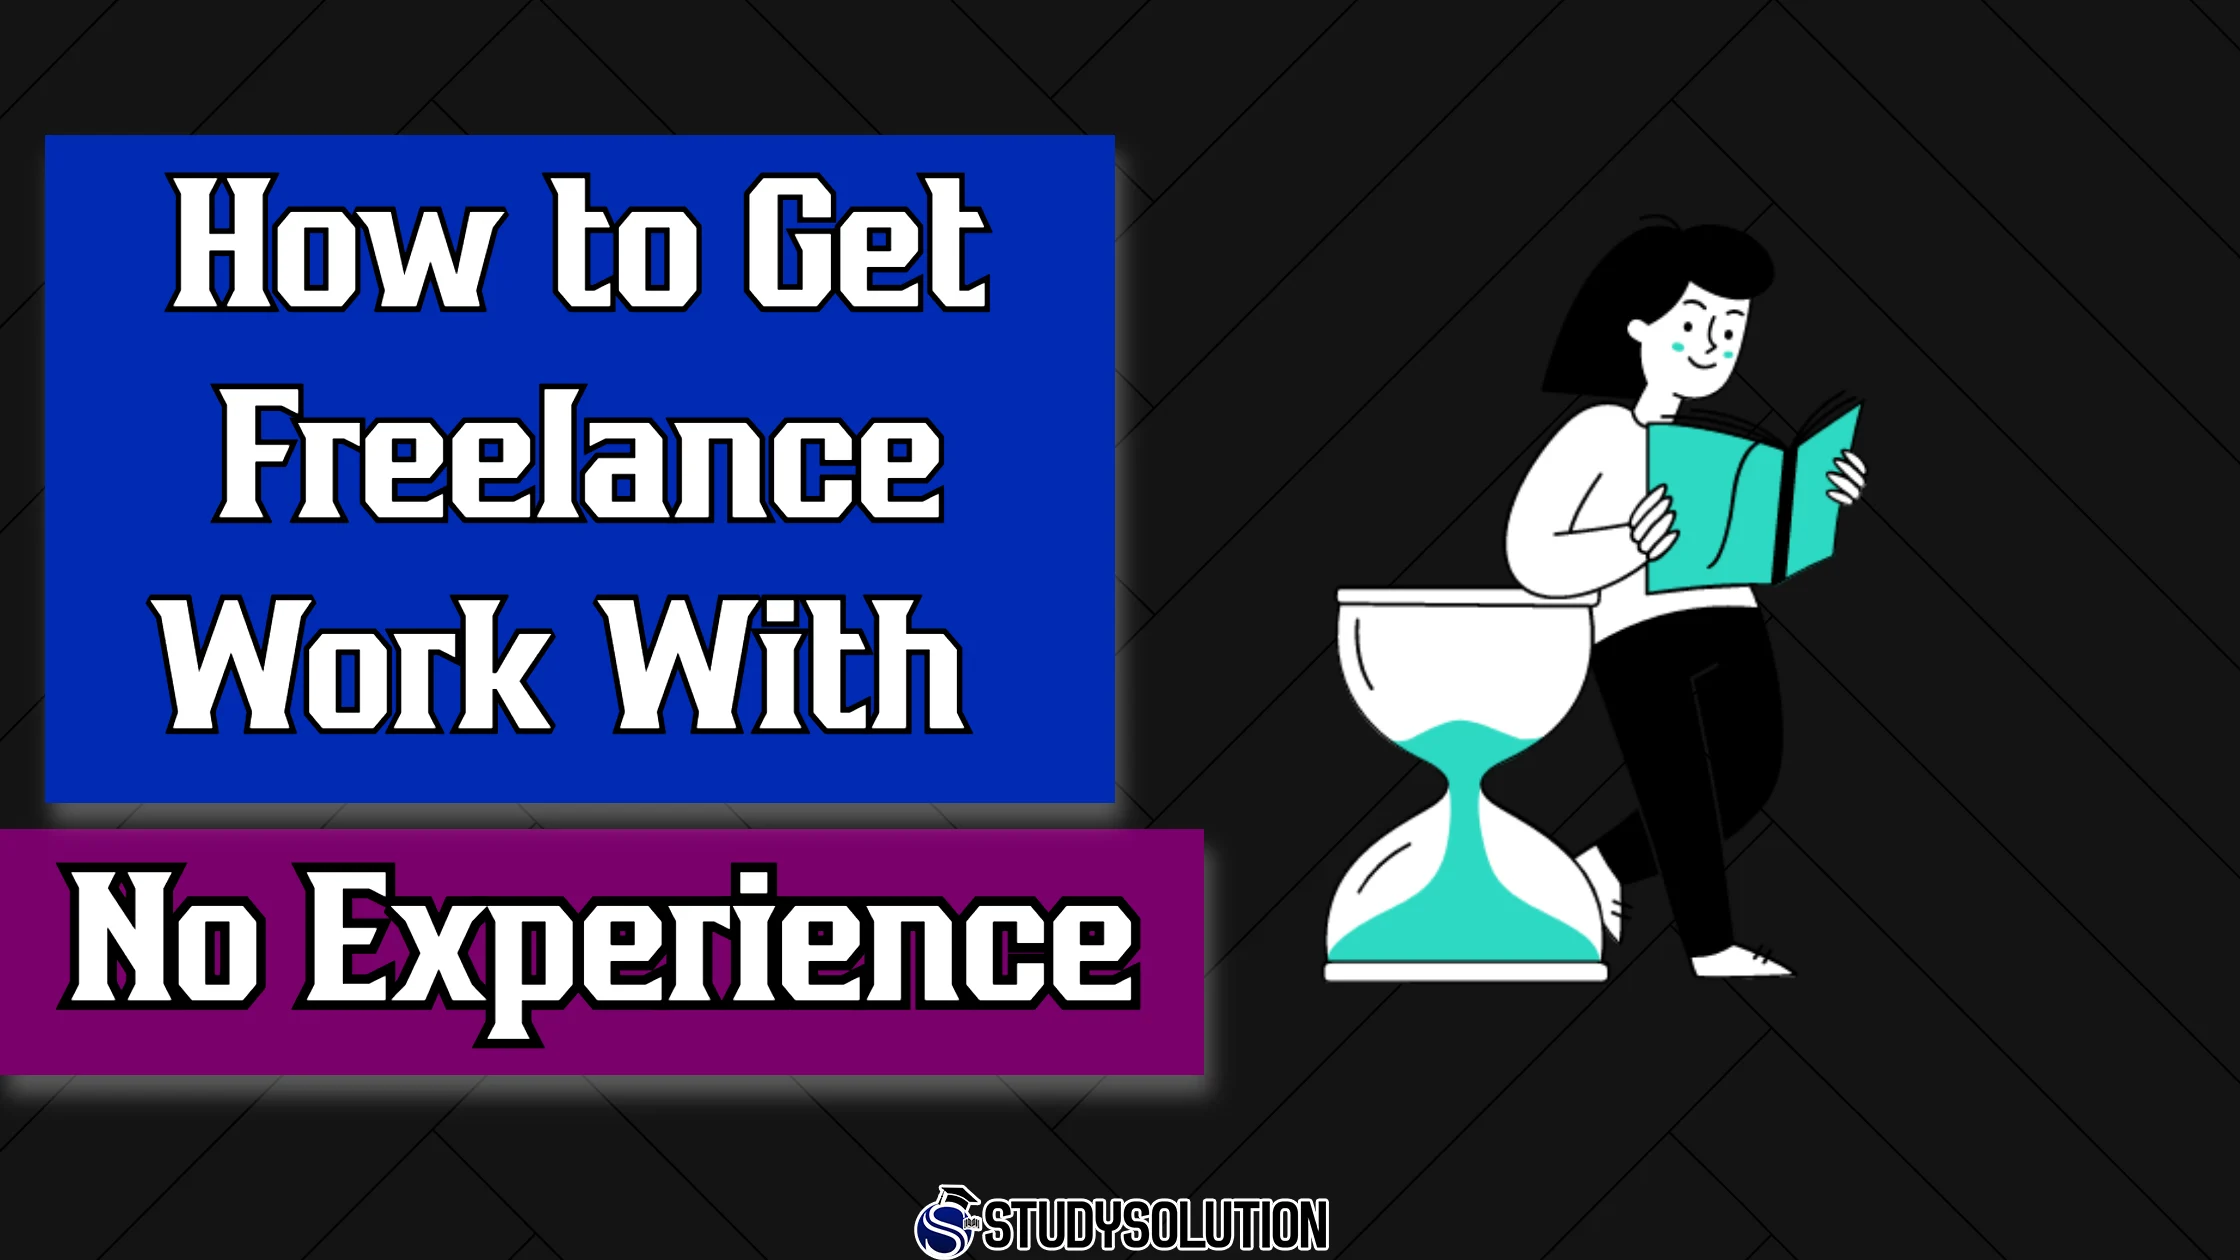 How to Get Freelance Work With No Experience